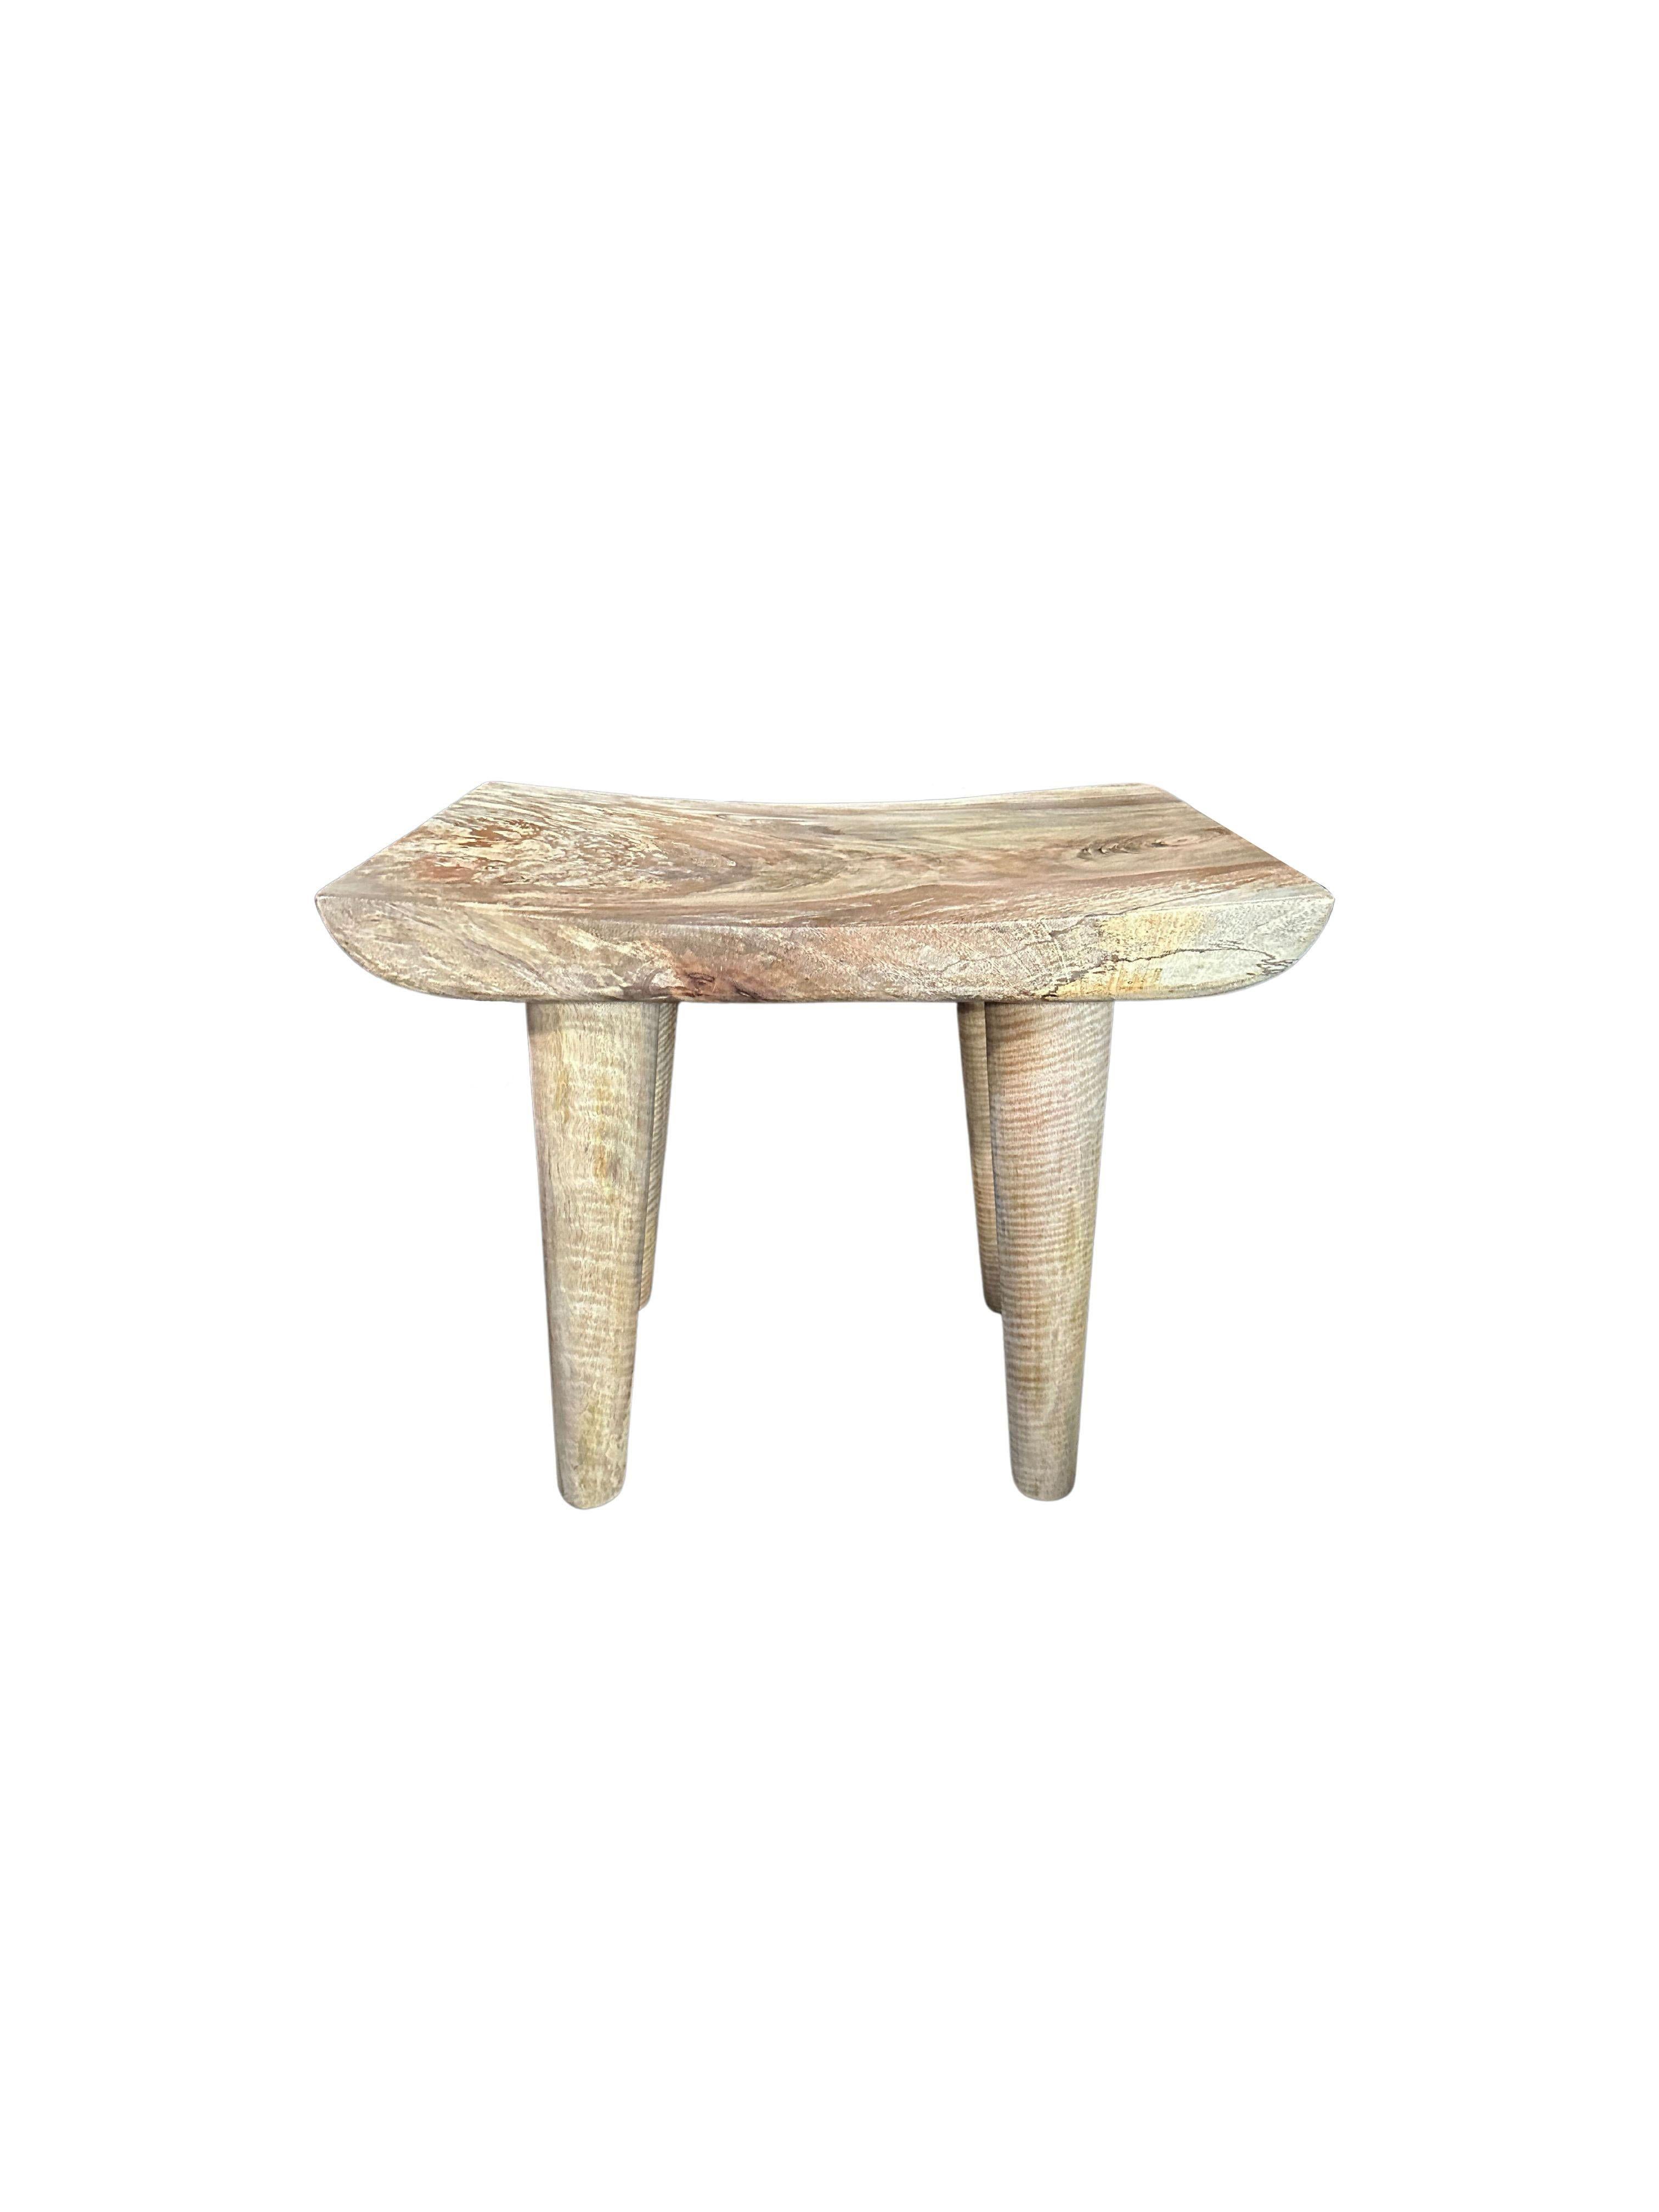 Organic Modern Sculptural Mango Wood Stool with Curved Seat, Natural Finish For Sale